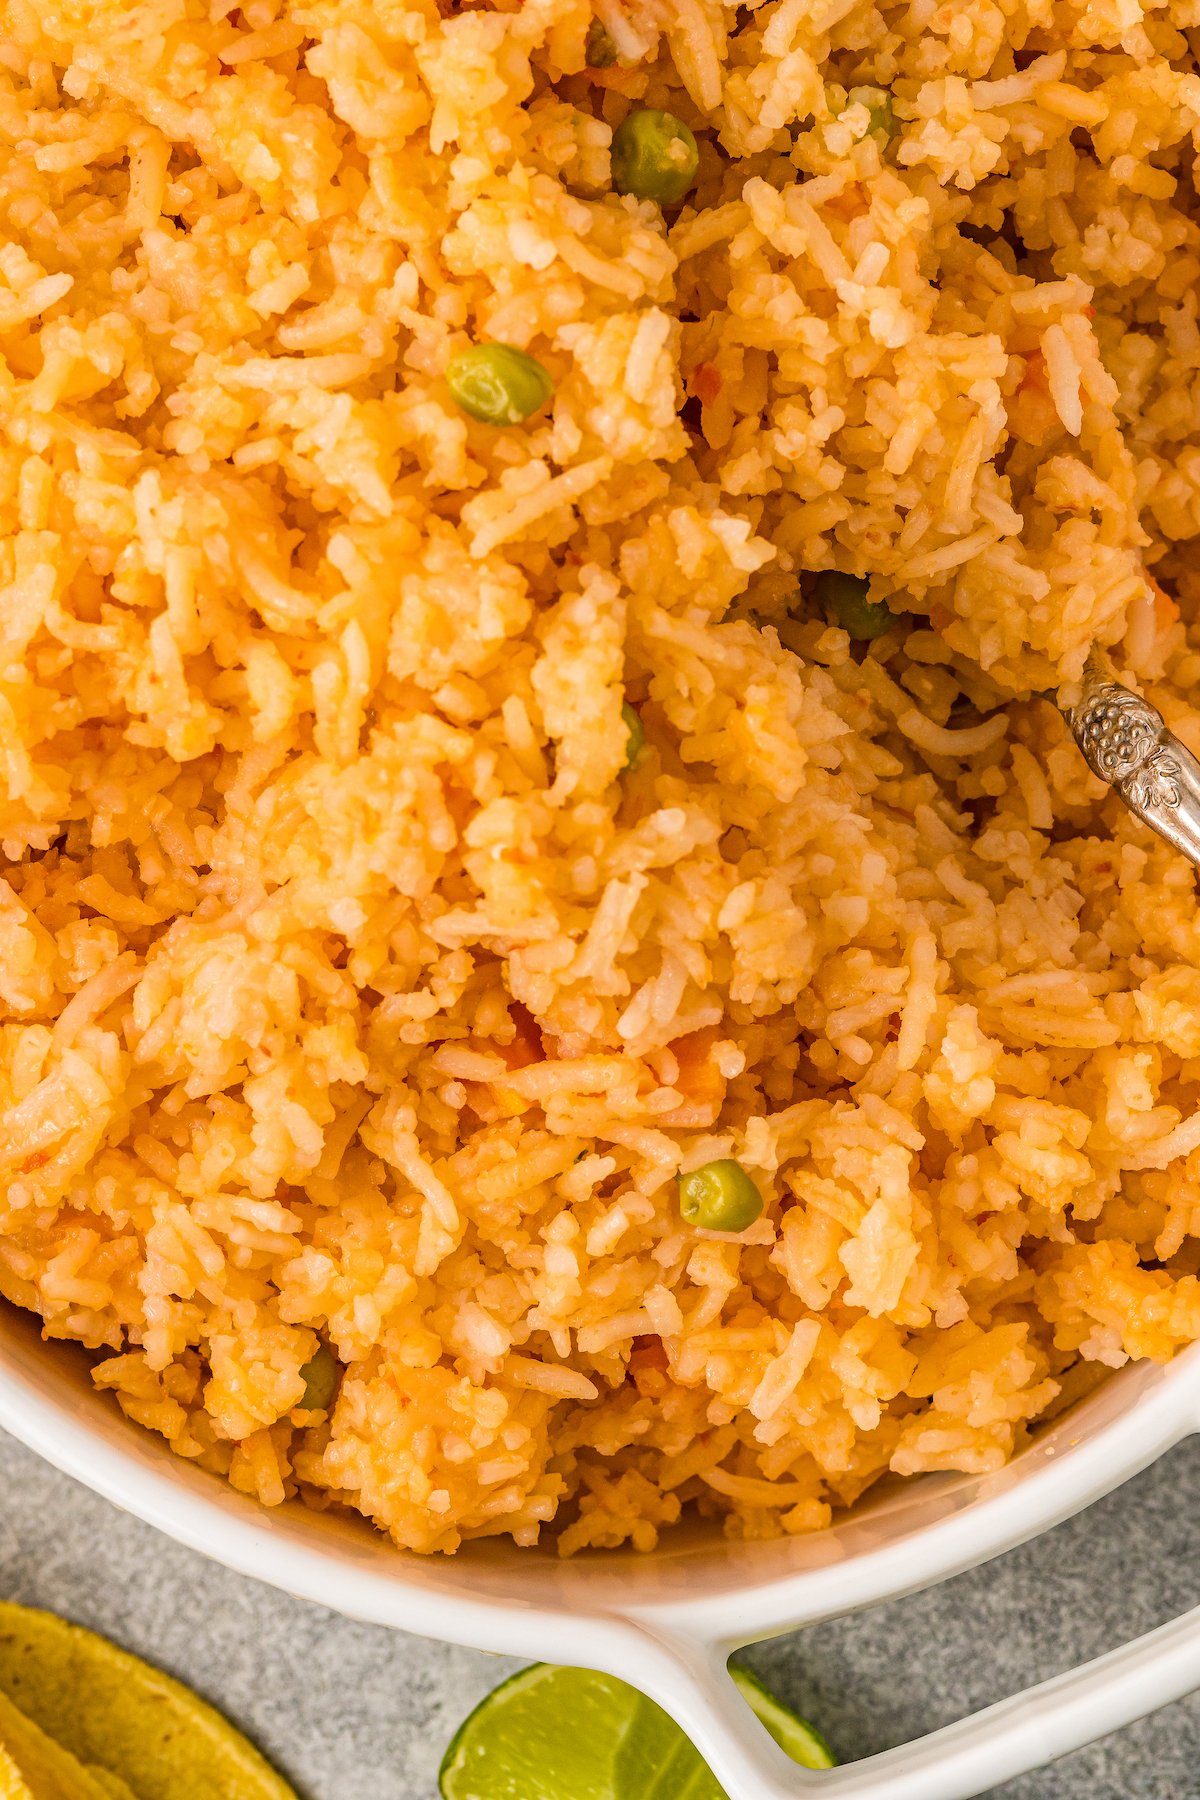 Seasoned Mexican-style rice with peas and carrots.